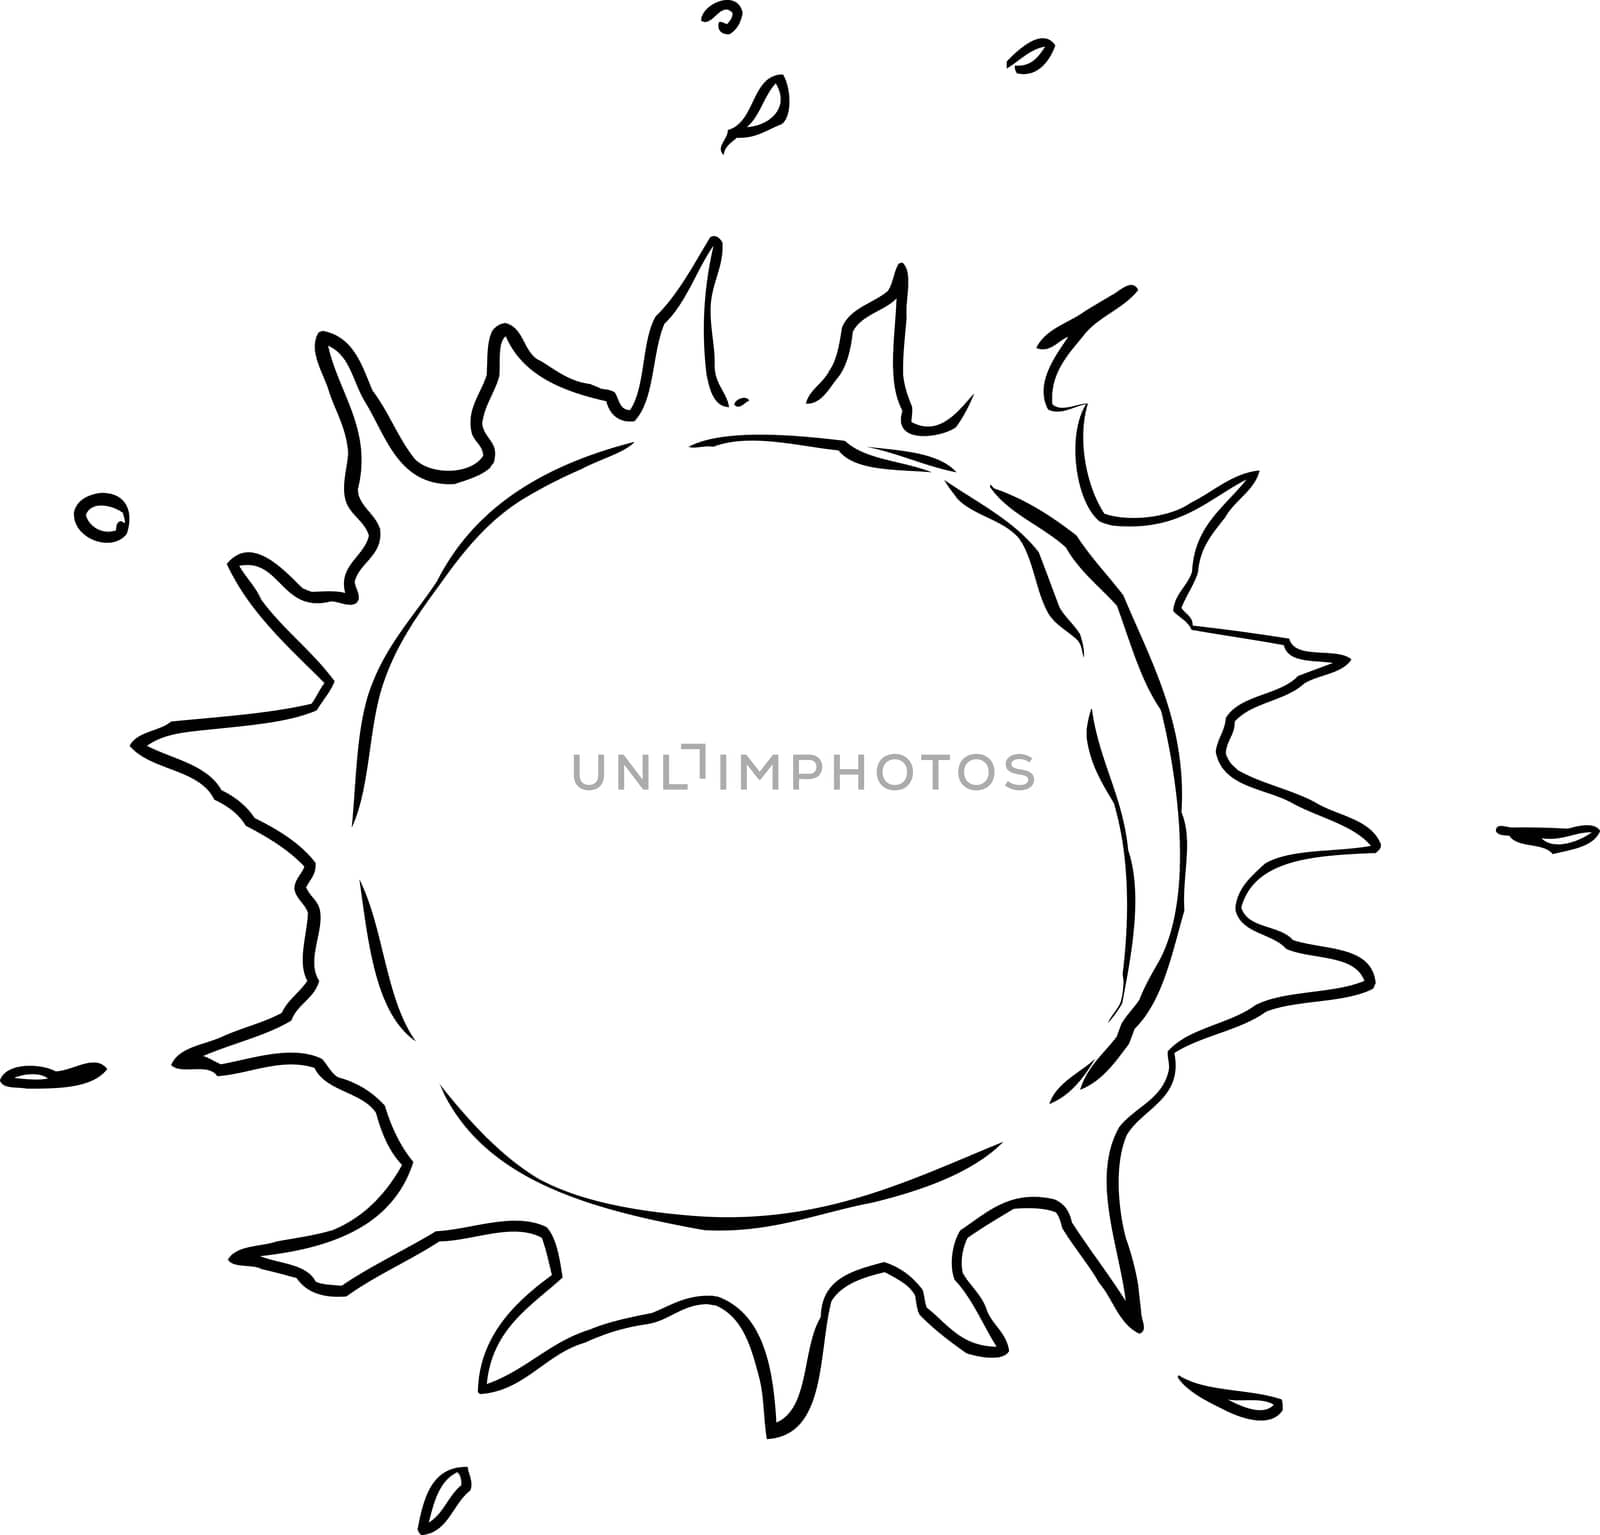 Outline doodle drawing of the sun with blazing flares